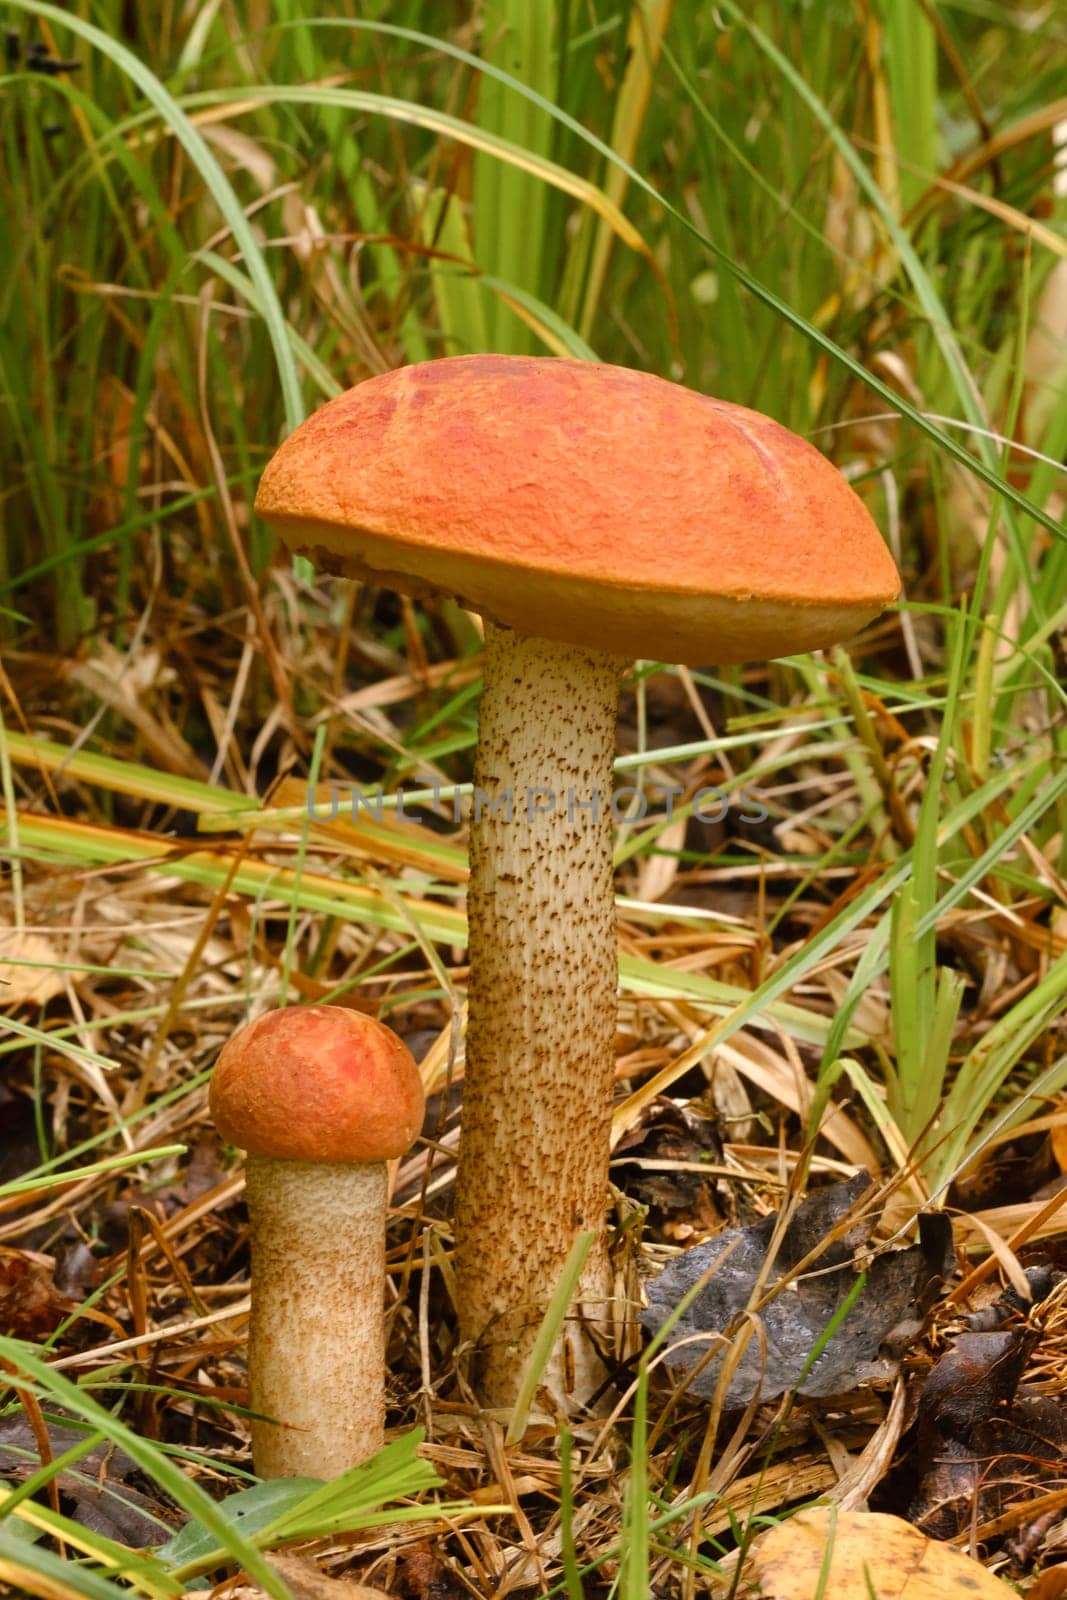 Two red aspen trees grow in the forest. Mushrooms in the forest. Mushroom picking by Lobachad